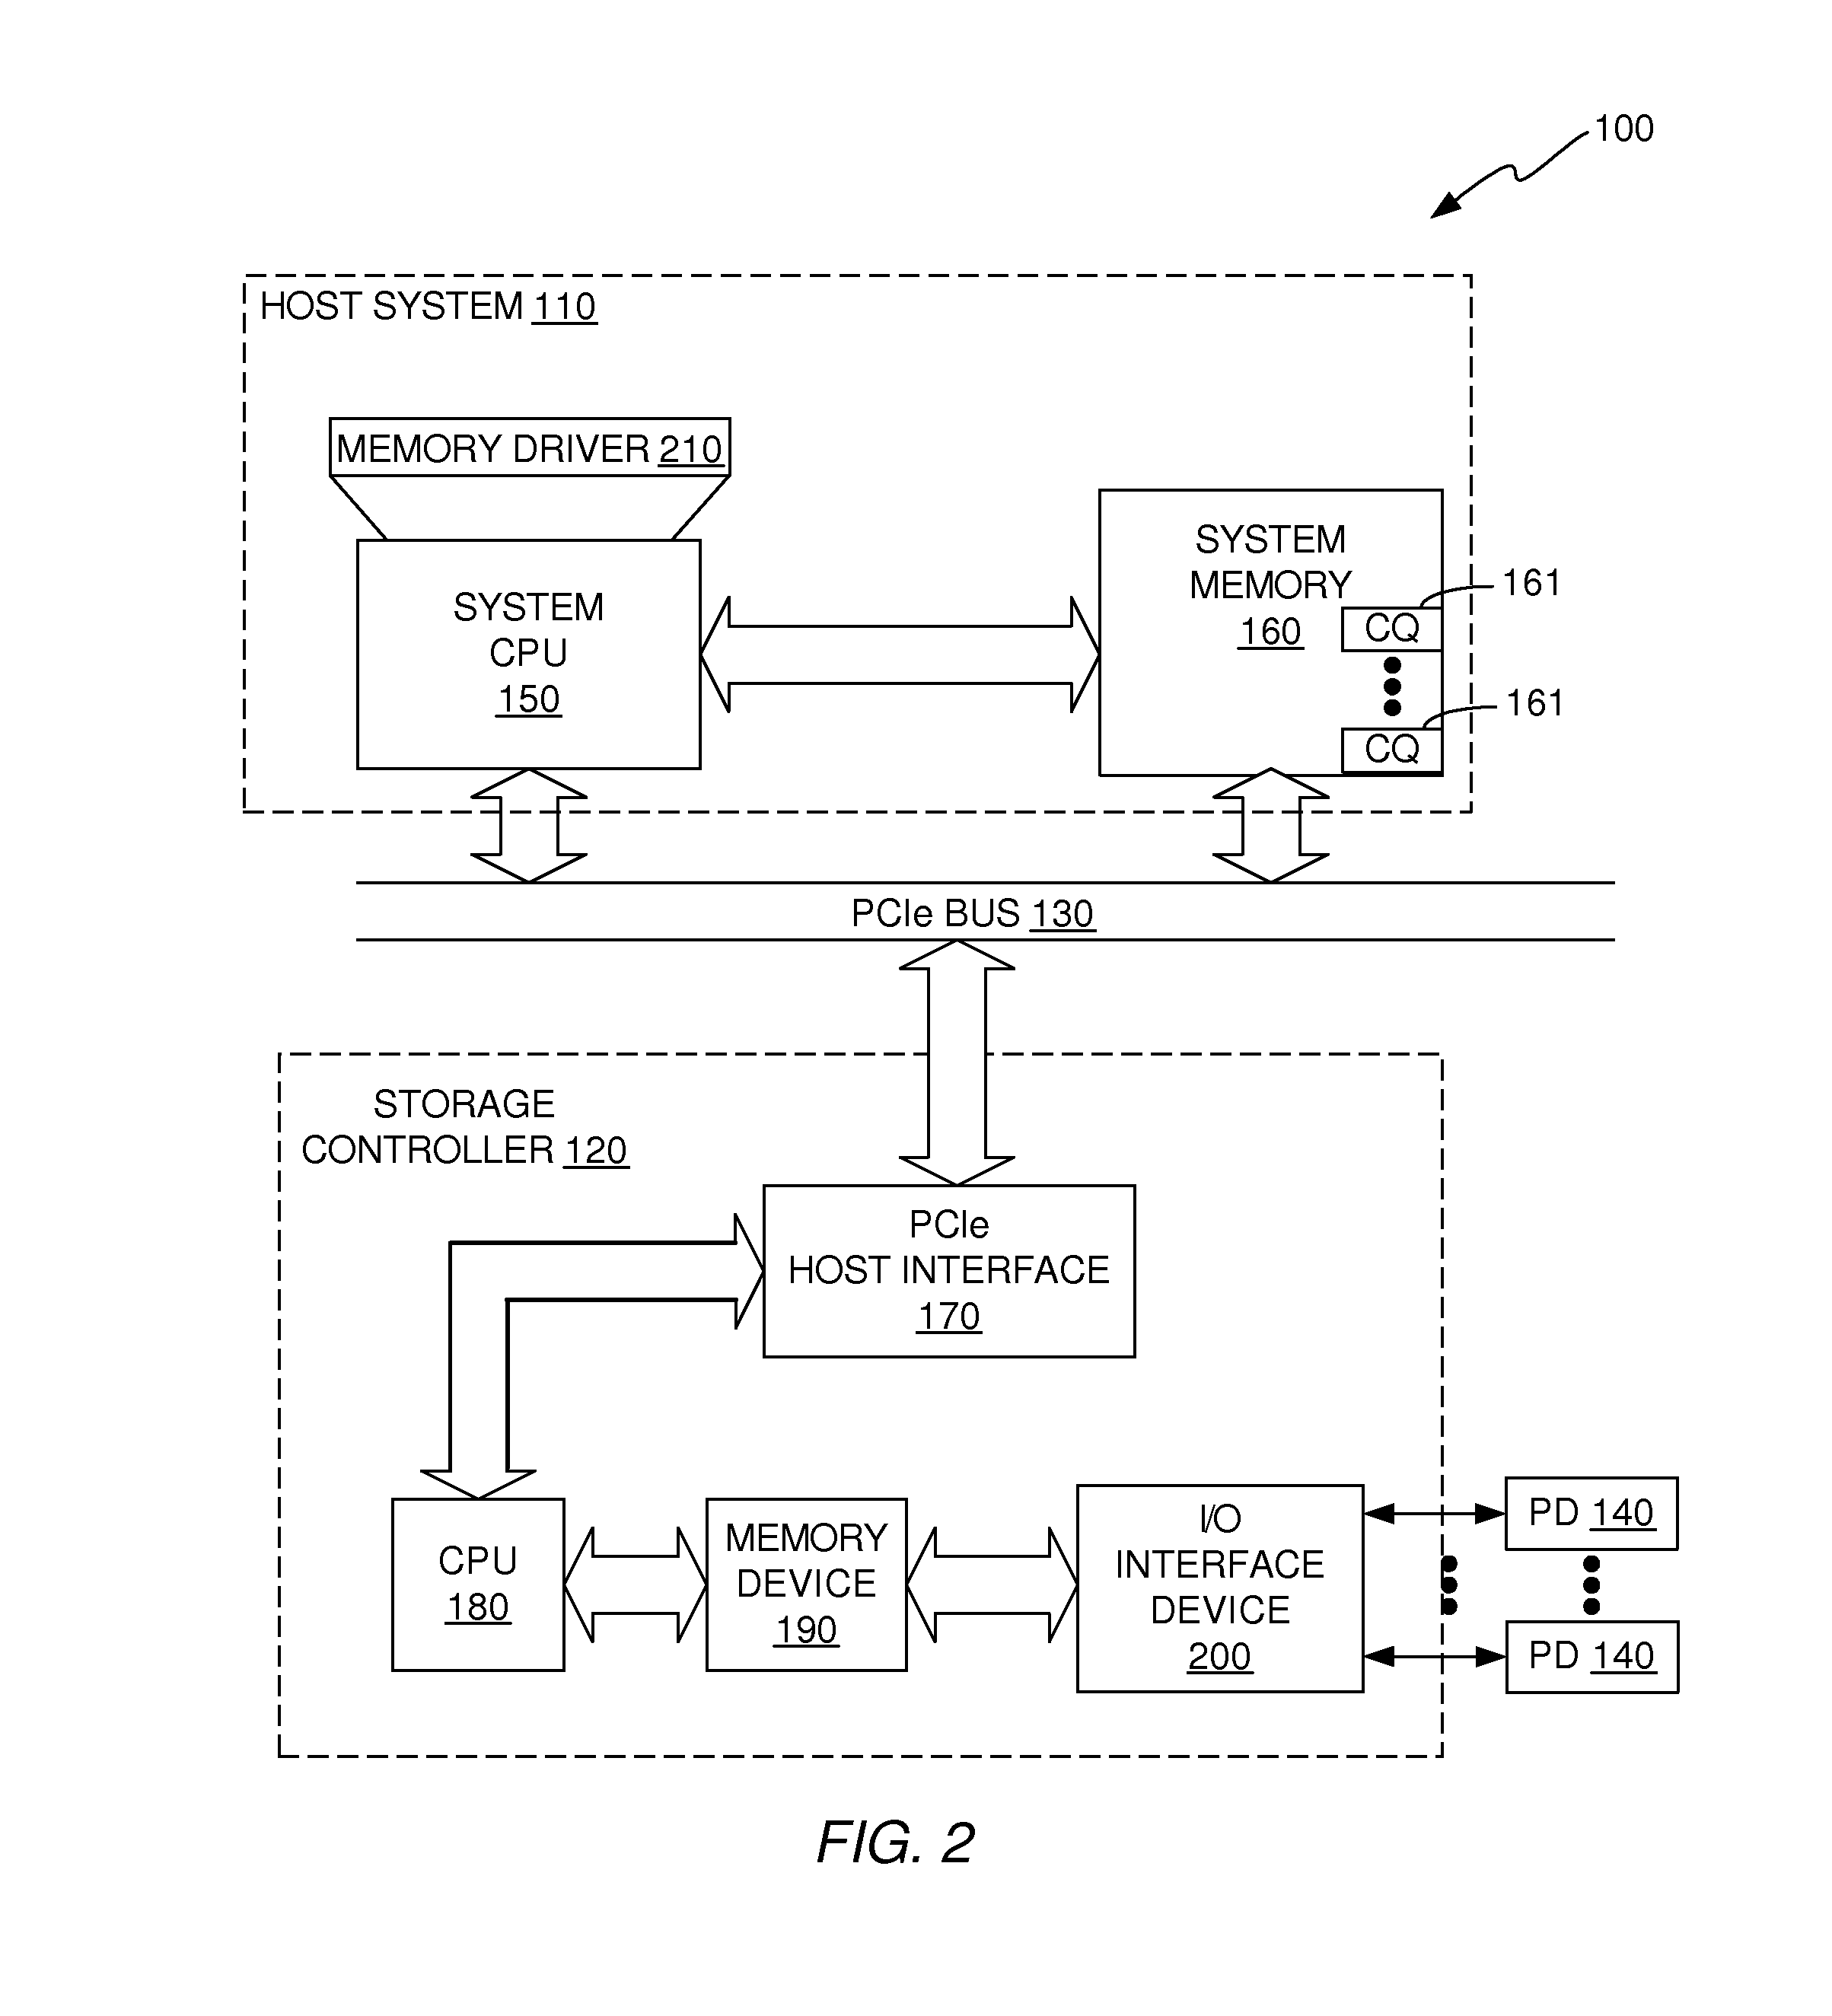 Methods and systems for reducing spurious interrupts in a data storage system